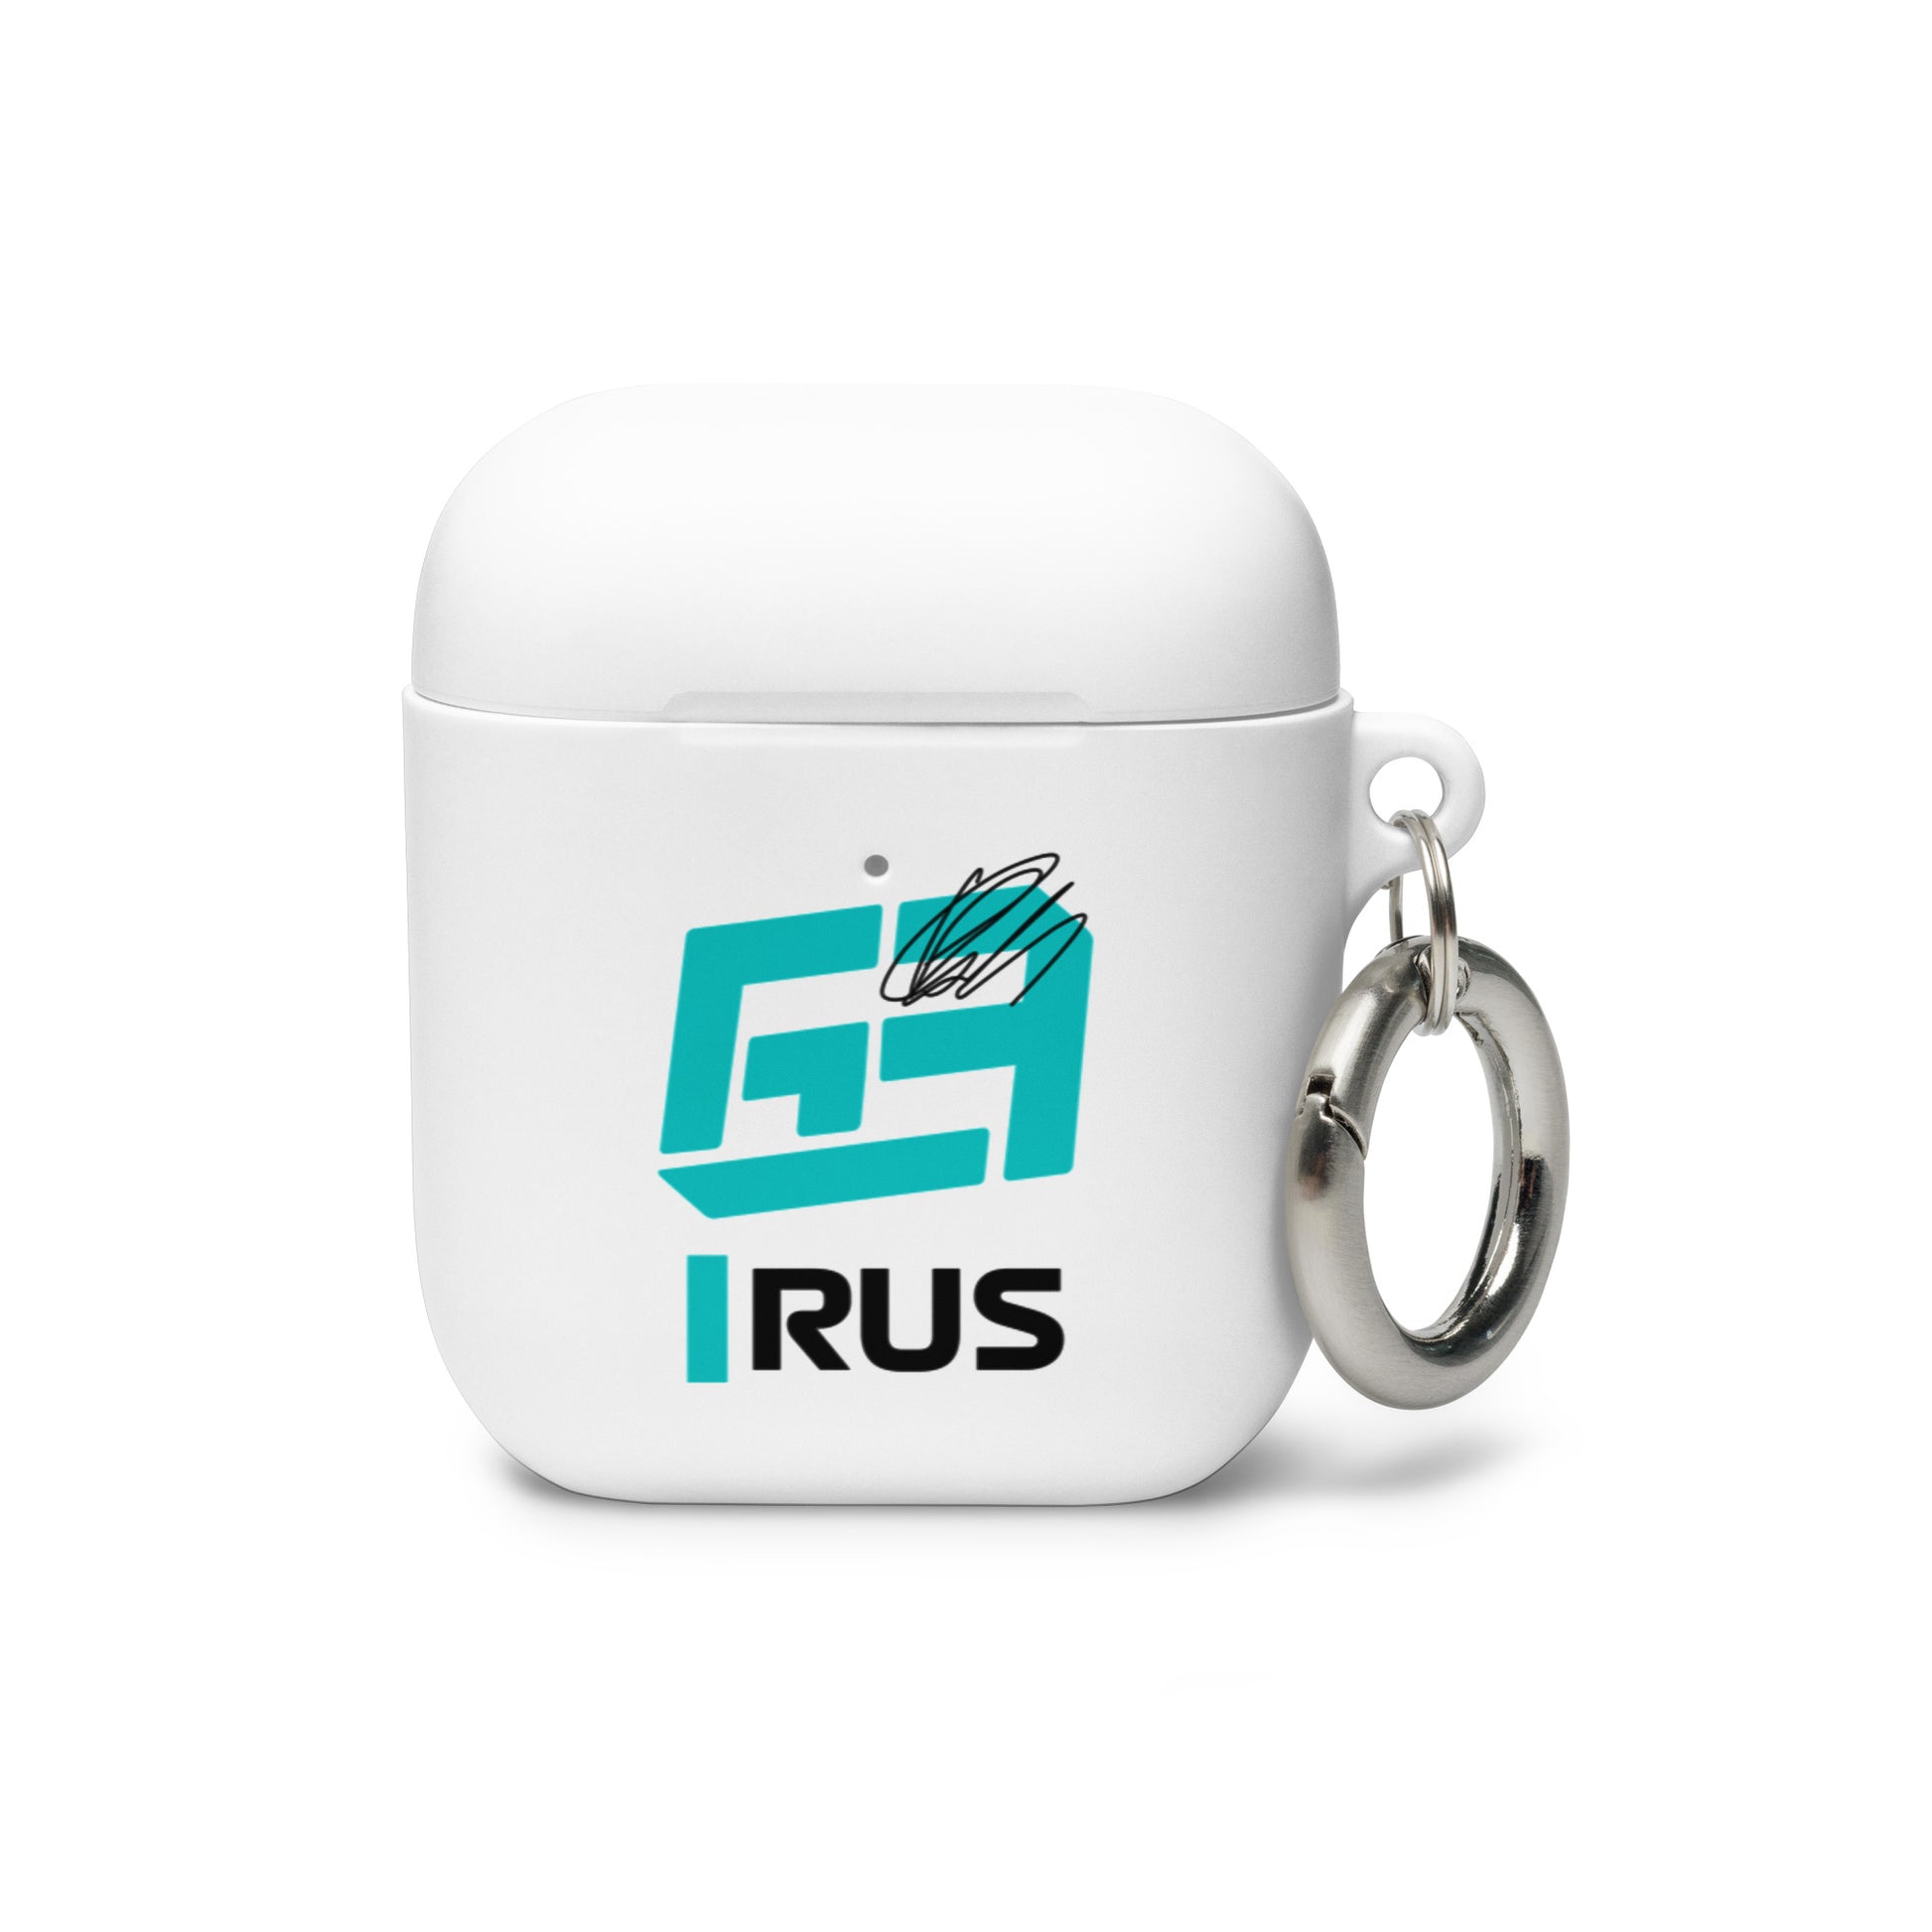 george russell airpods case white